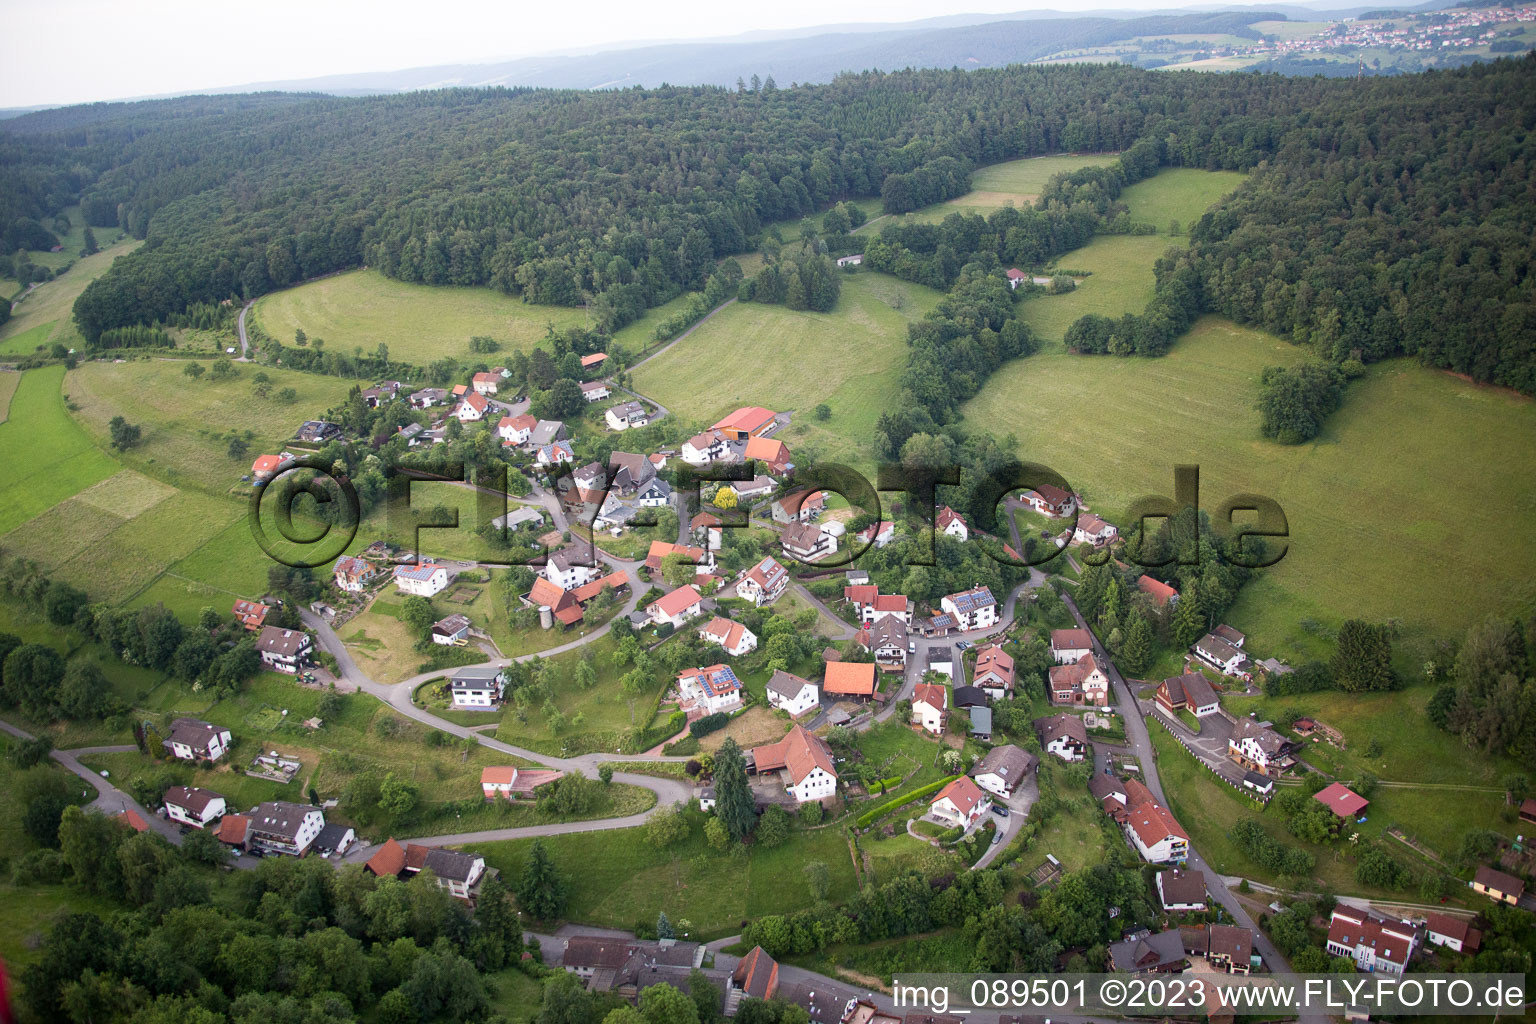 Brombach in the state Baden-Wuerttemberg, Germany seen from a drone